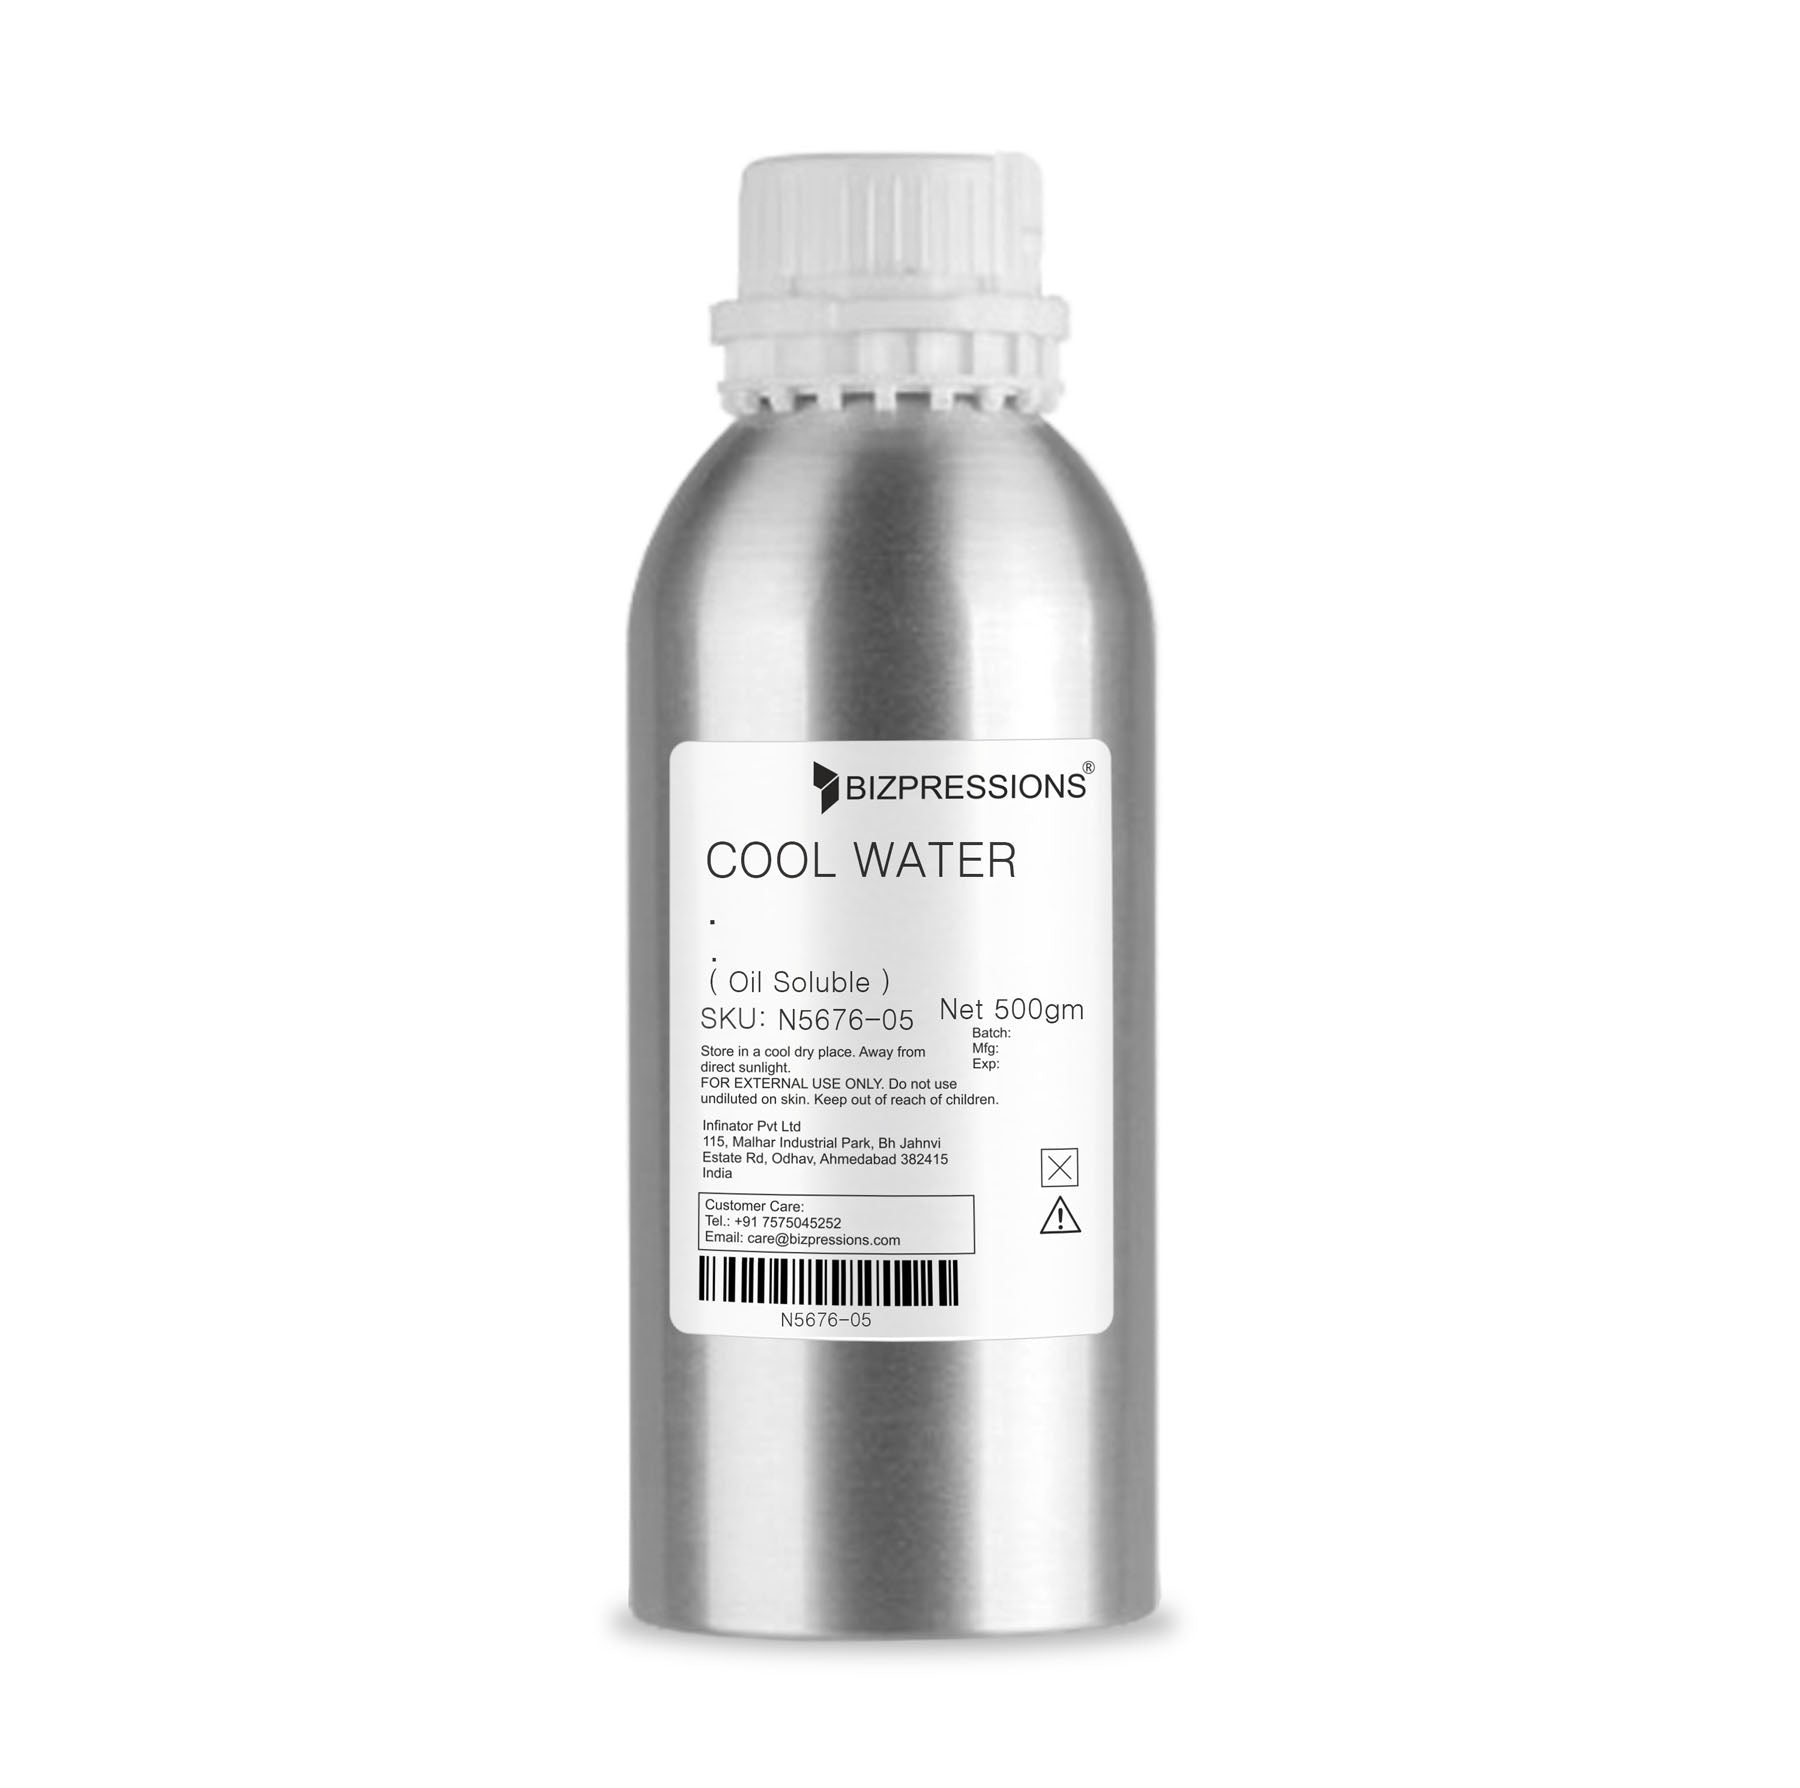 COOL WATER - Fragrance ( Oil Soluble ) - 500 gm